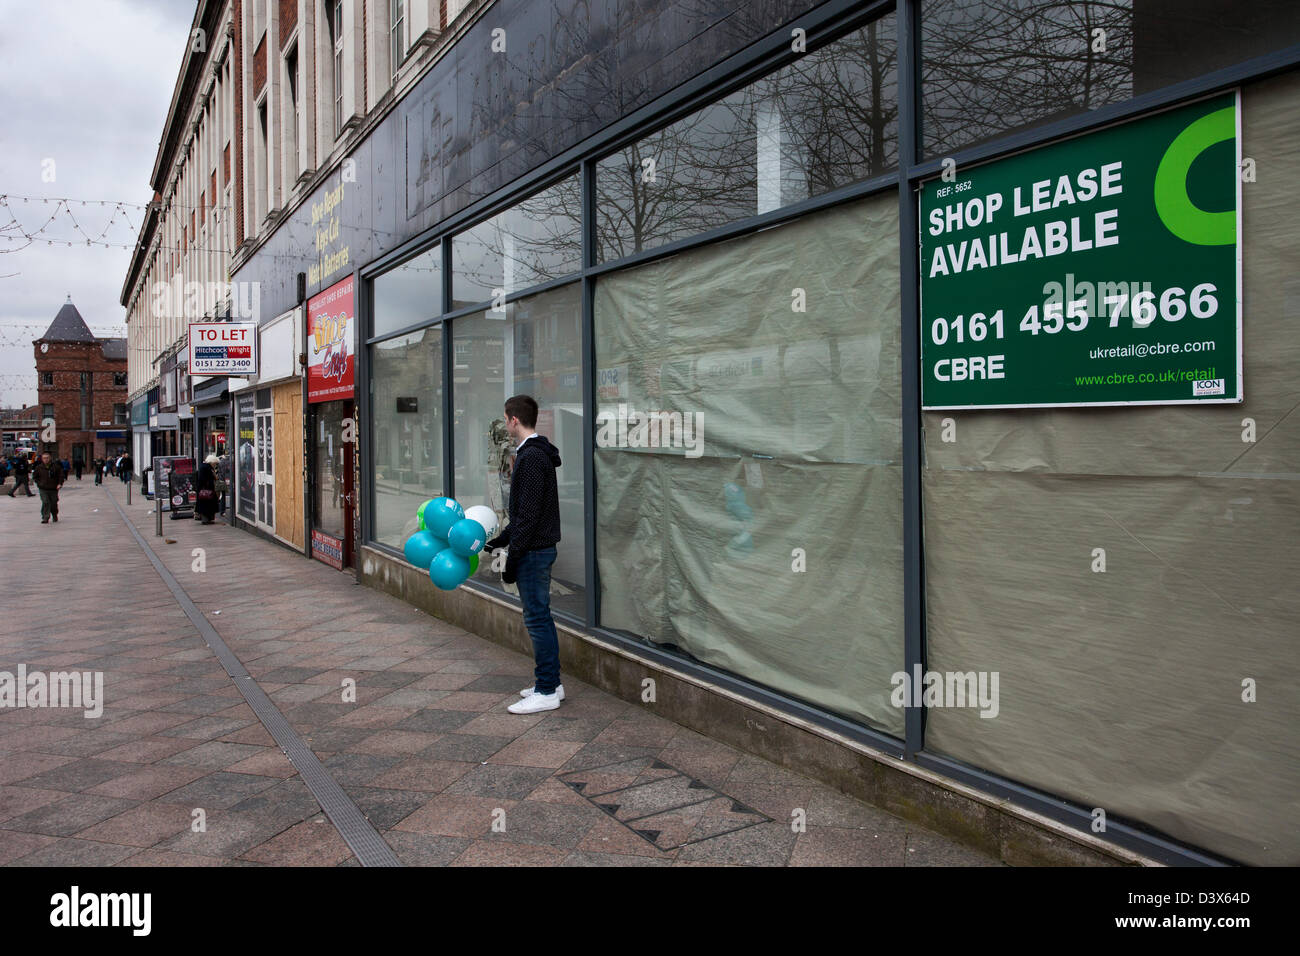 Shop Lease Available People and the streets and shops of rundown Warrington town centre in decline. Borough in the area of Cheshire, England, UK Stock Photo